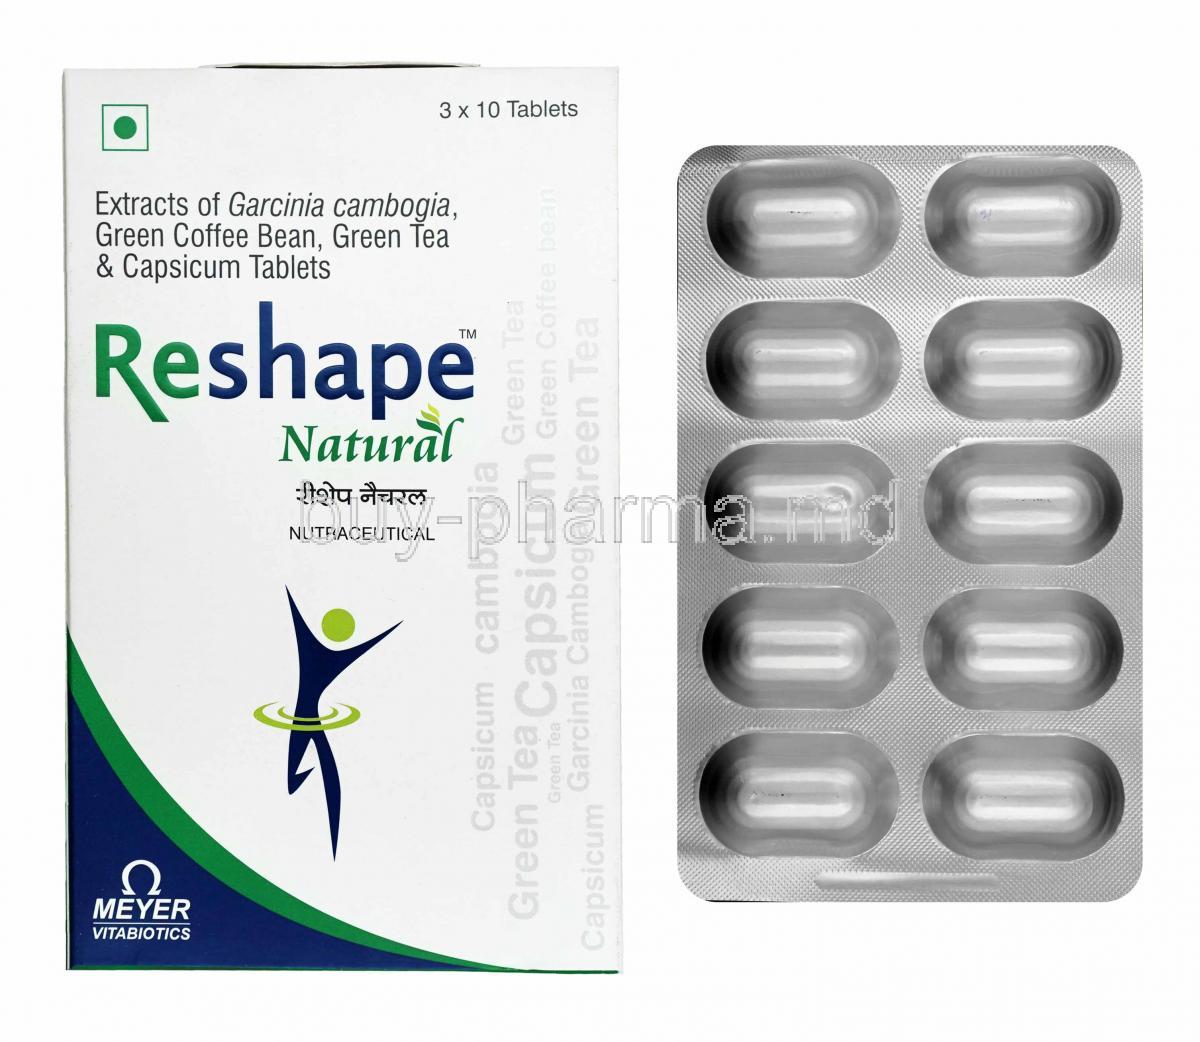 Reshape Natural box and tablets